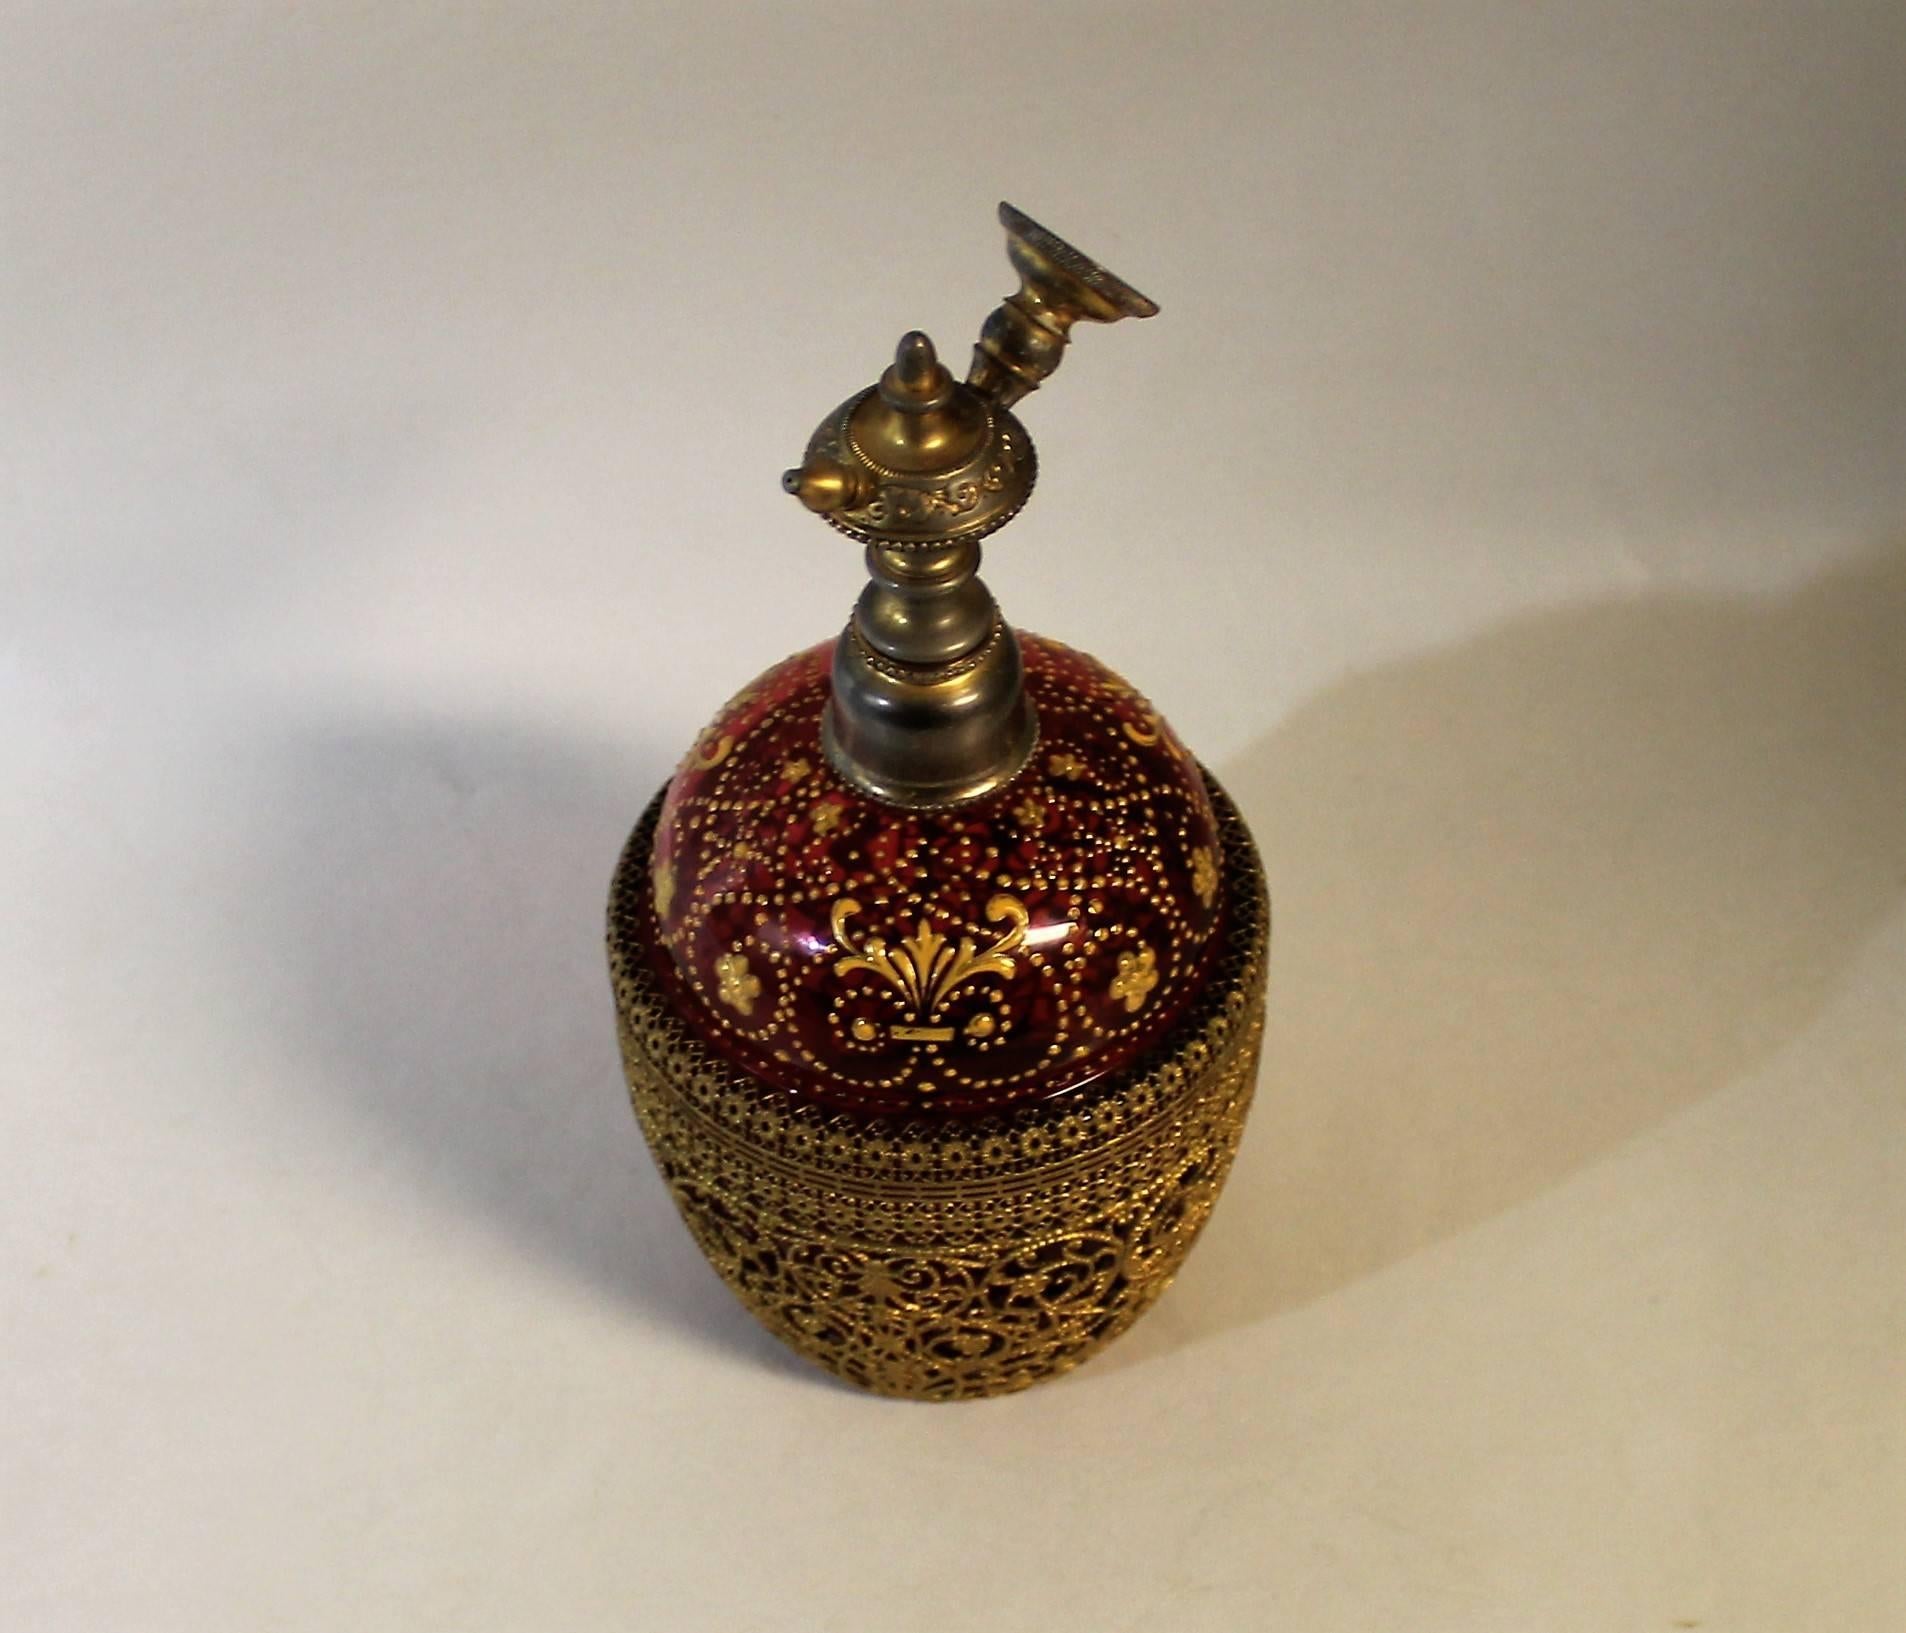 Cranberry Glass Perfume Bottle with Filigree and Gold Enamel In Good Condition For Sale In Hamilton, Ontario